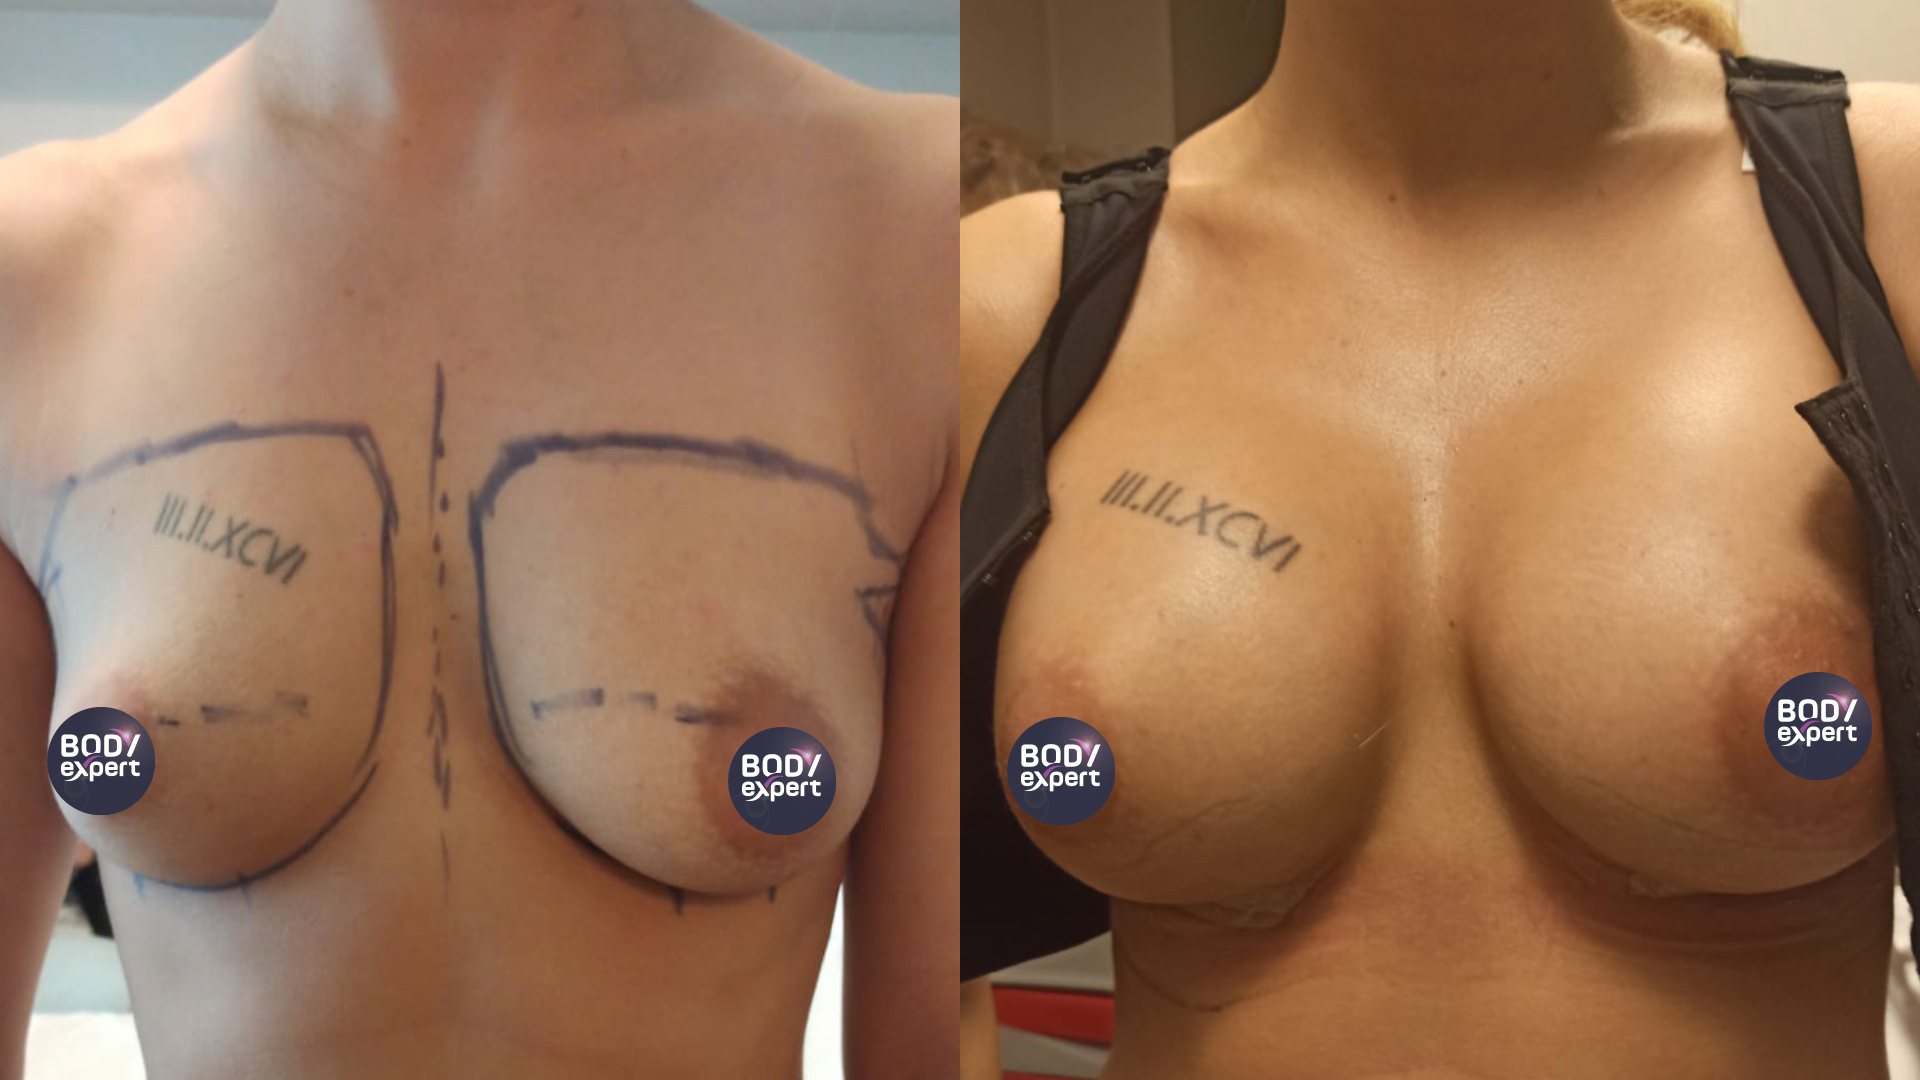 The results of a breast lift combined with a breast augmentation